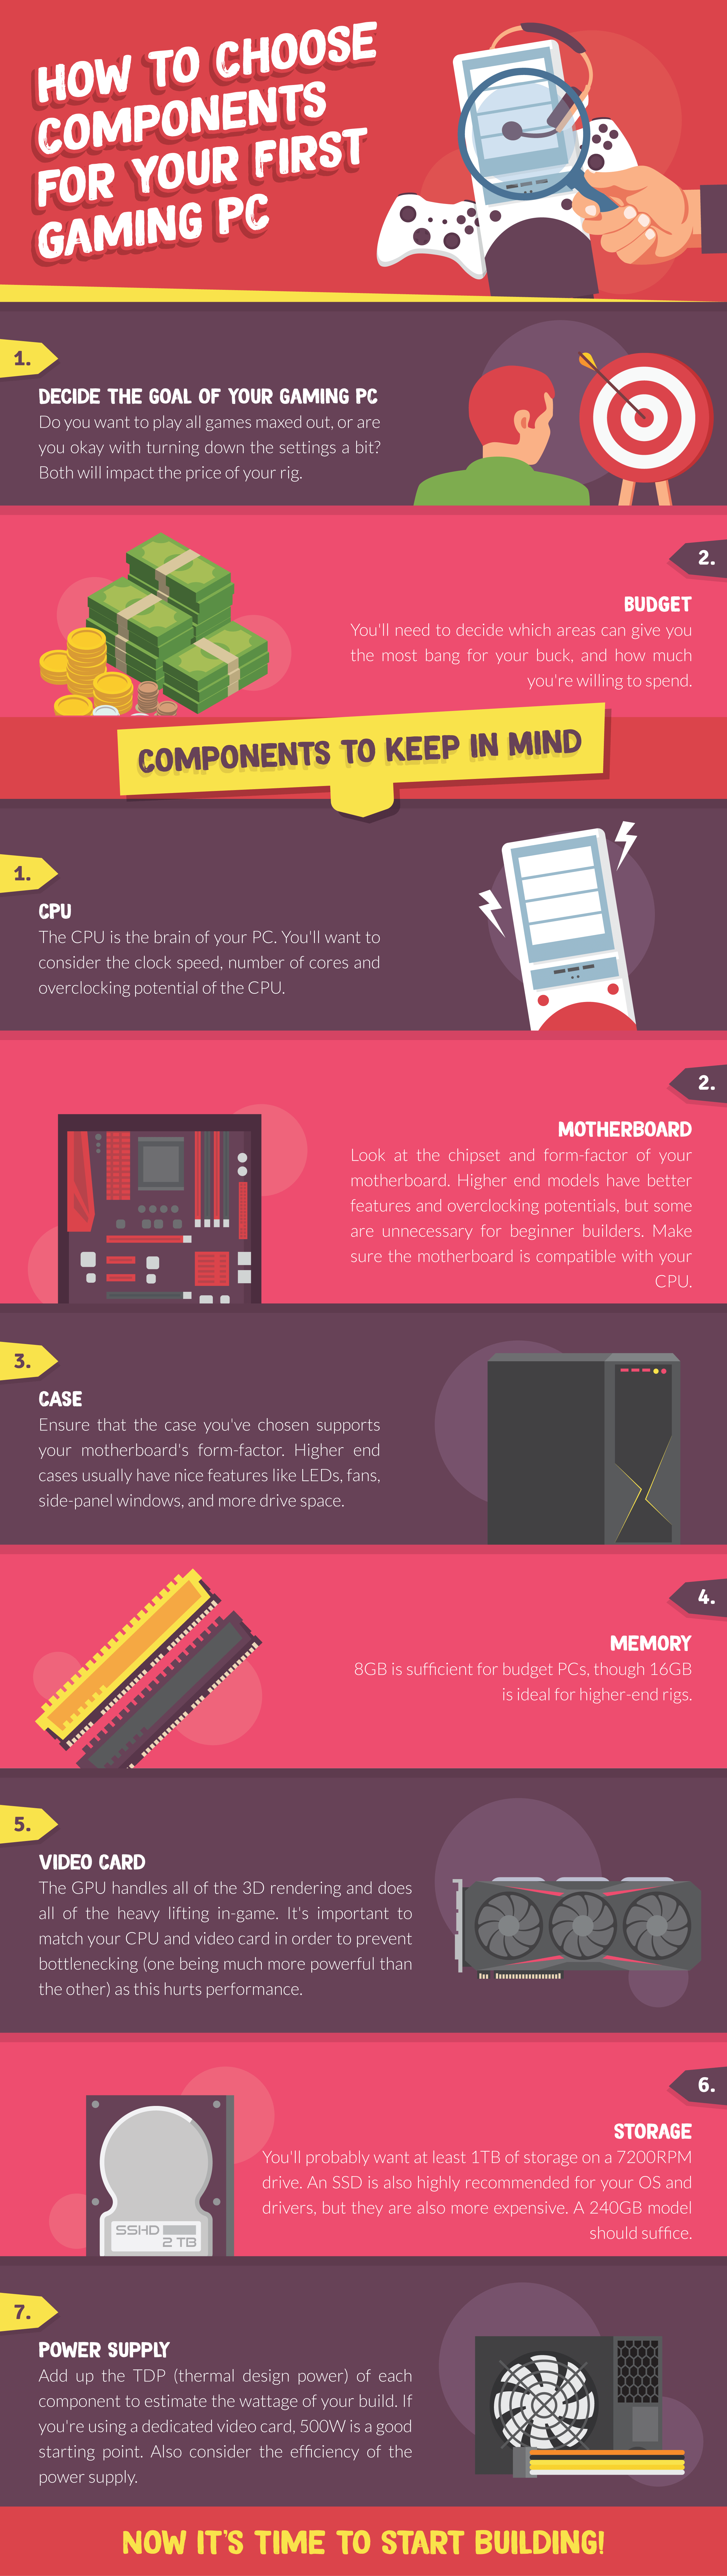 First Gaming PC Components Infographic